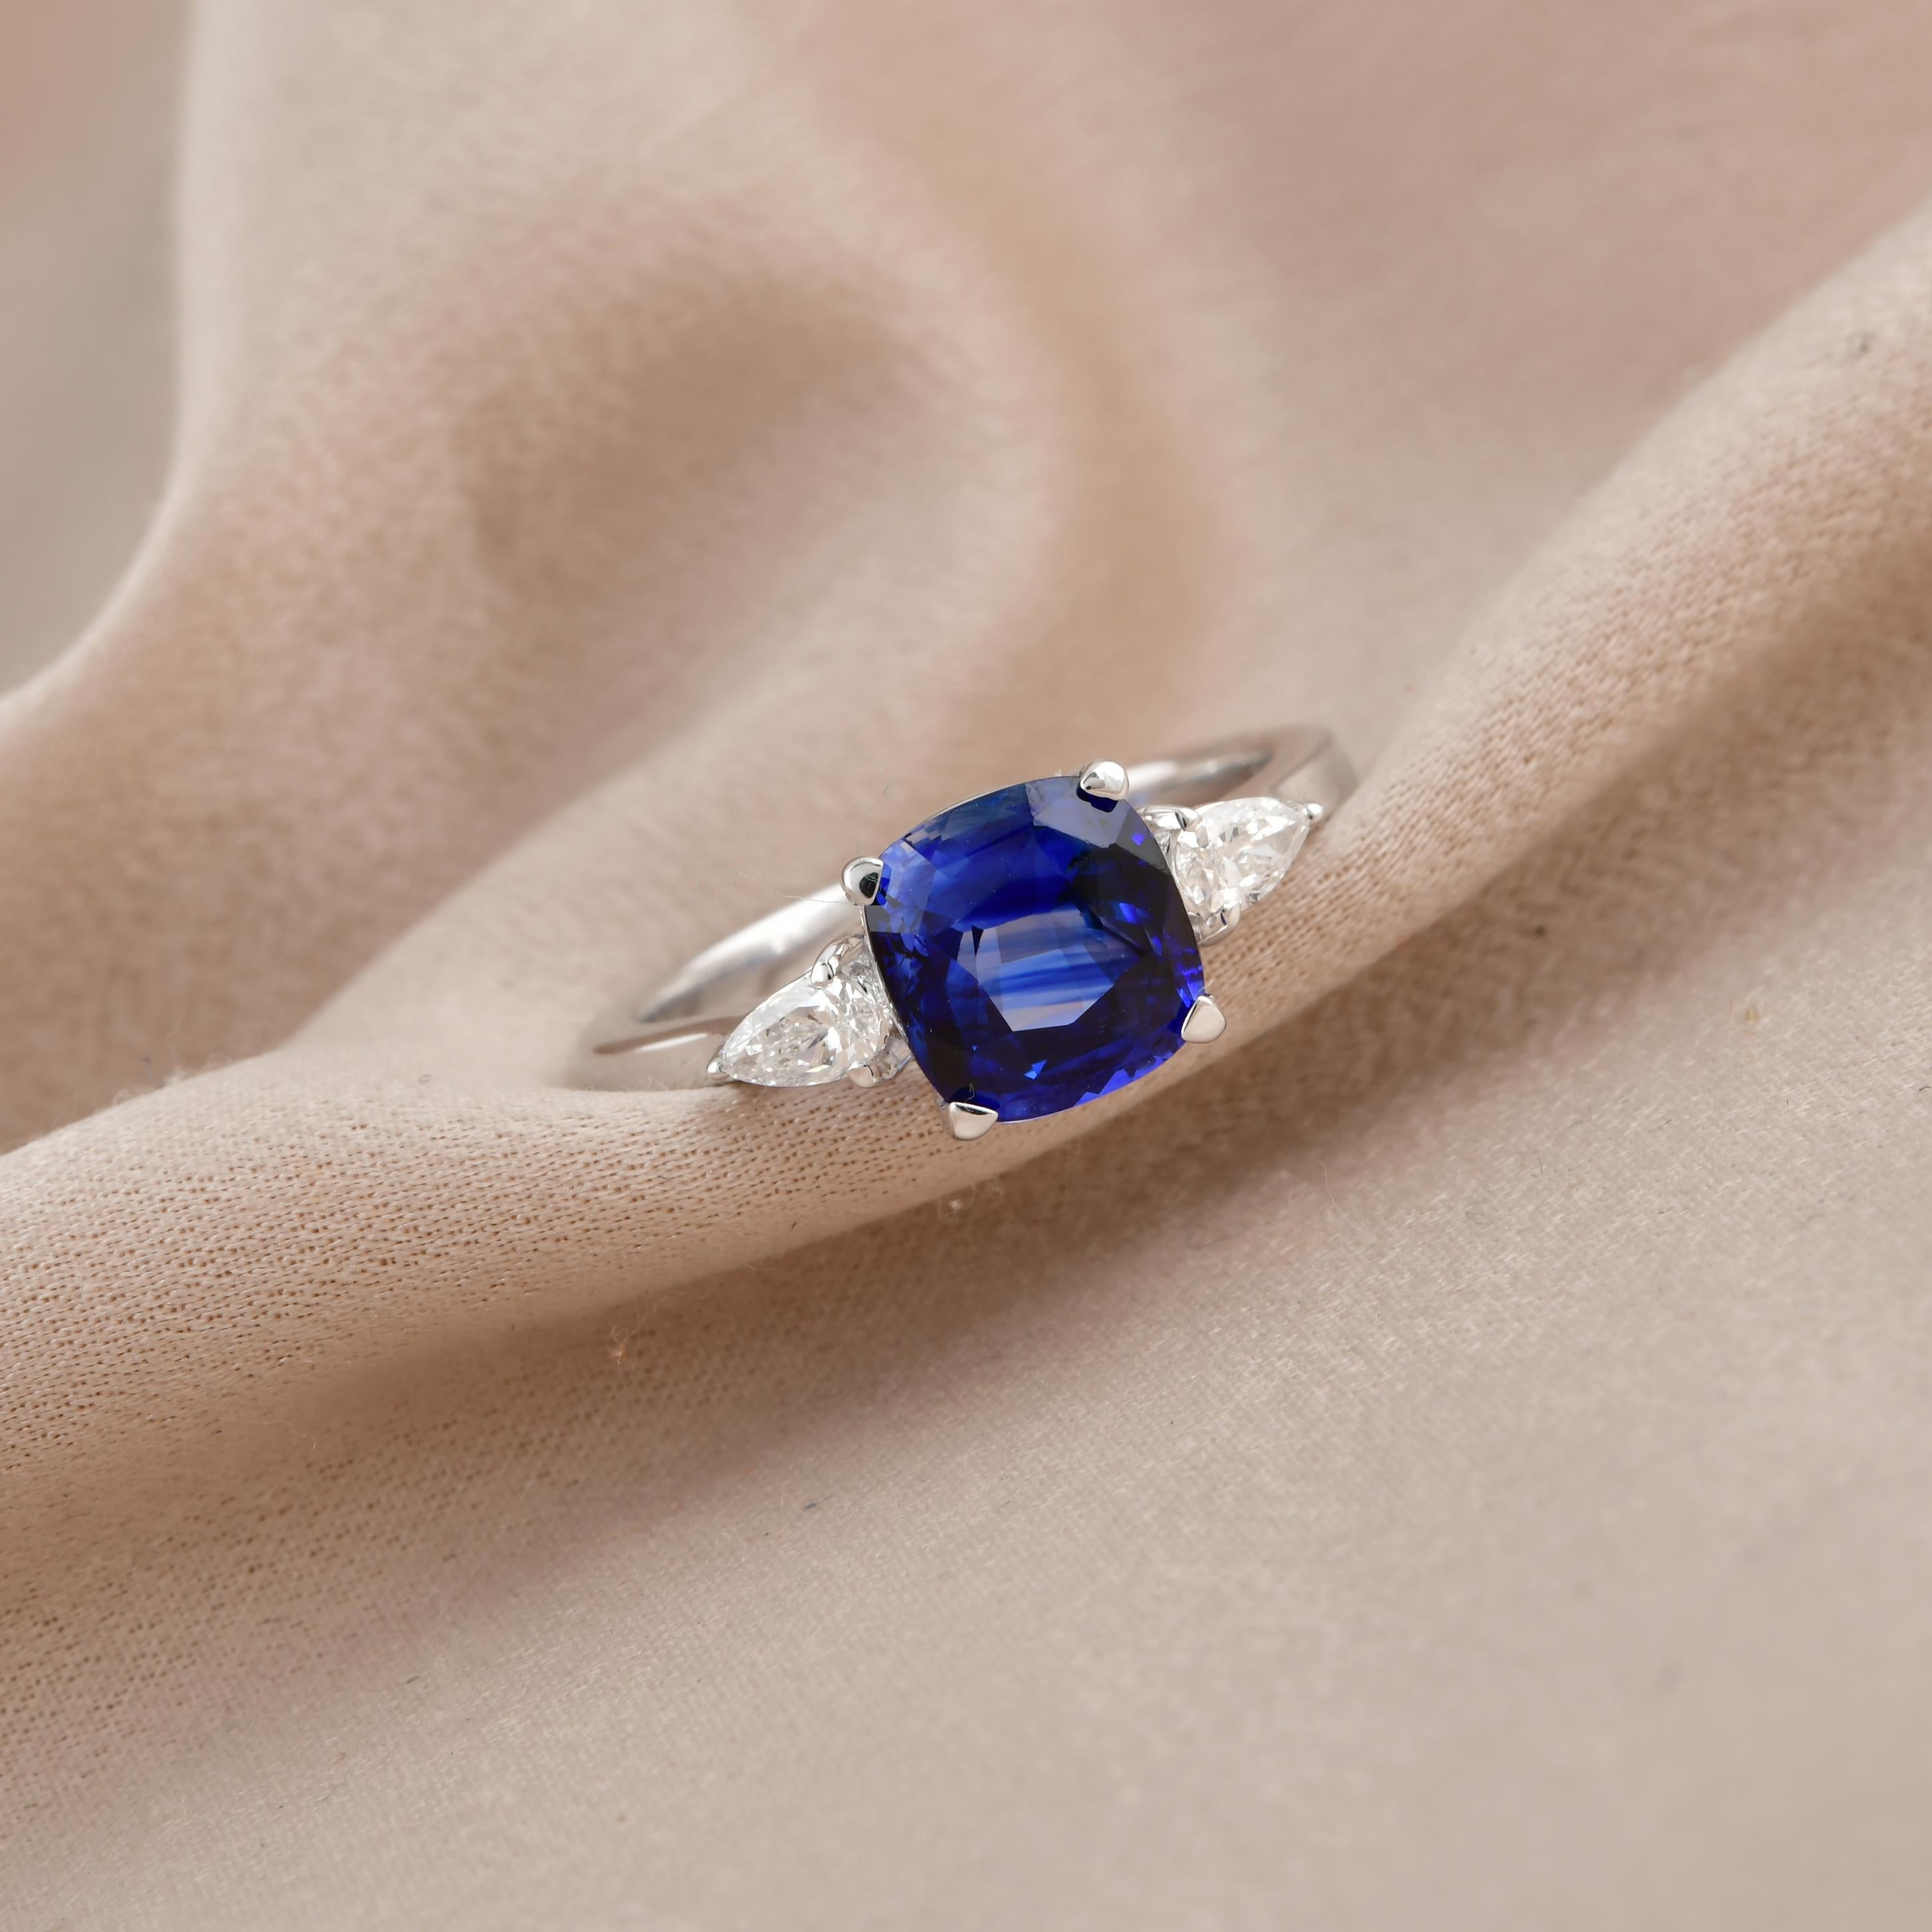 This Dainty Diamond Sapphire Ring with 0.25 ct. Genuine Diamonds & 2.49 ct. Natural Blue Sapphire is a promise of perfection and purity. This Ring is set in 18k Solid White Gold. You can choose this ring in 10k/14k/18k, Rose Gold/White Gold/Yellow